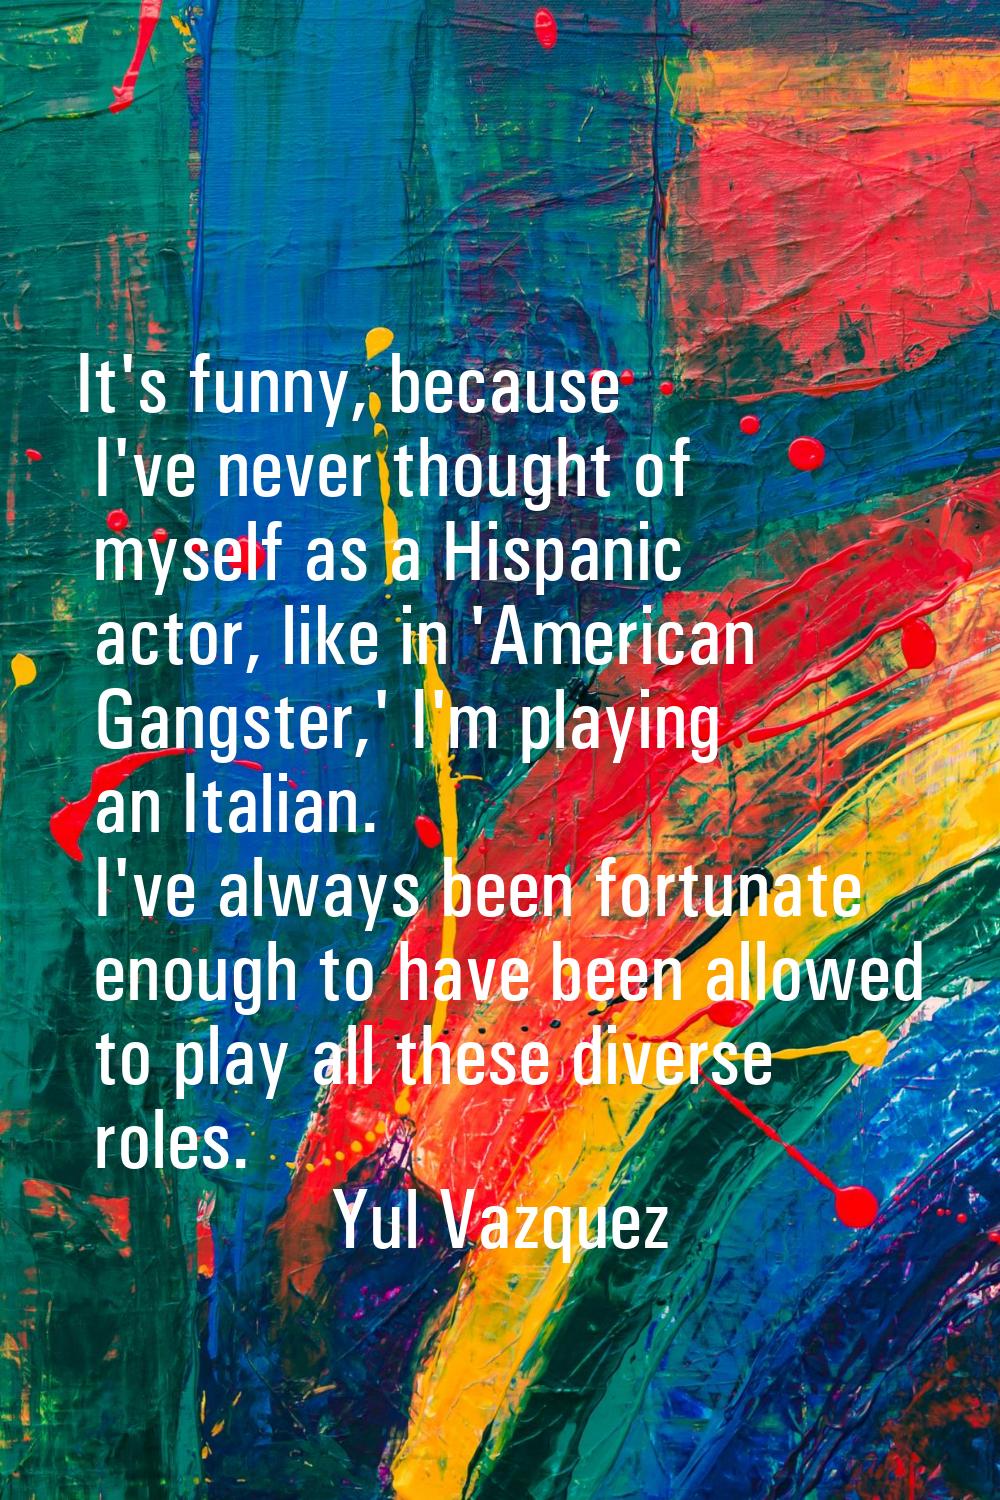 It's funny, because I've never thought of myself as a Hispanic actor, like in 'American Gangster,' 